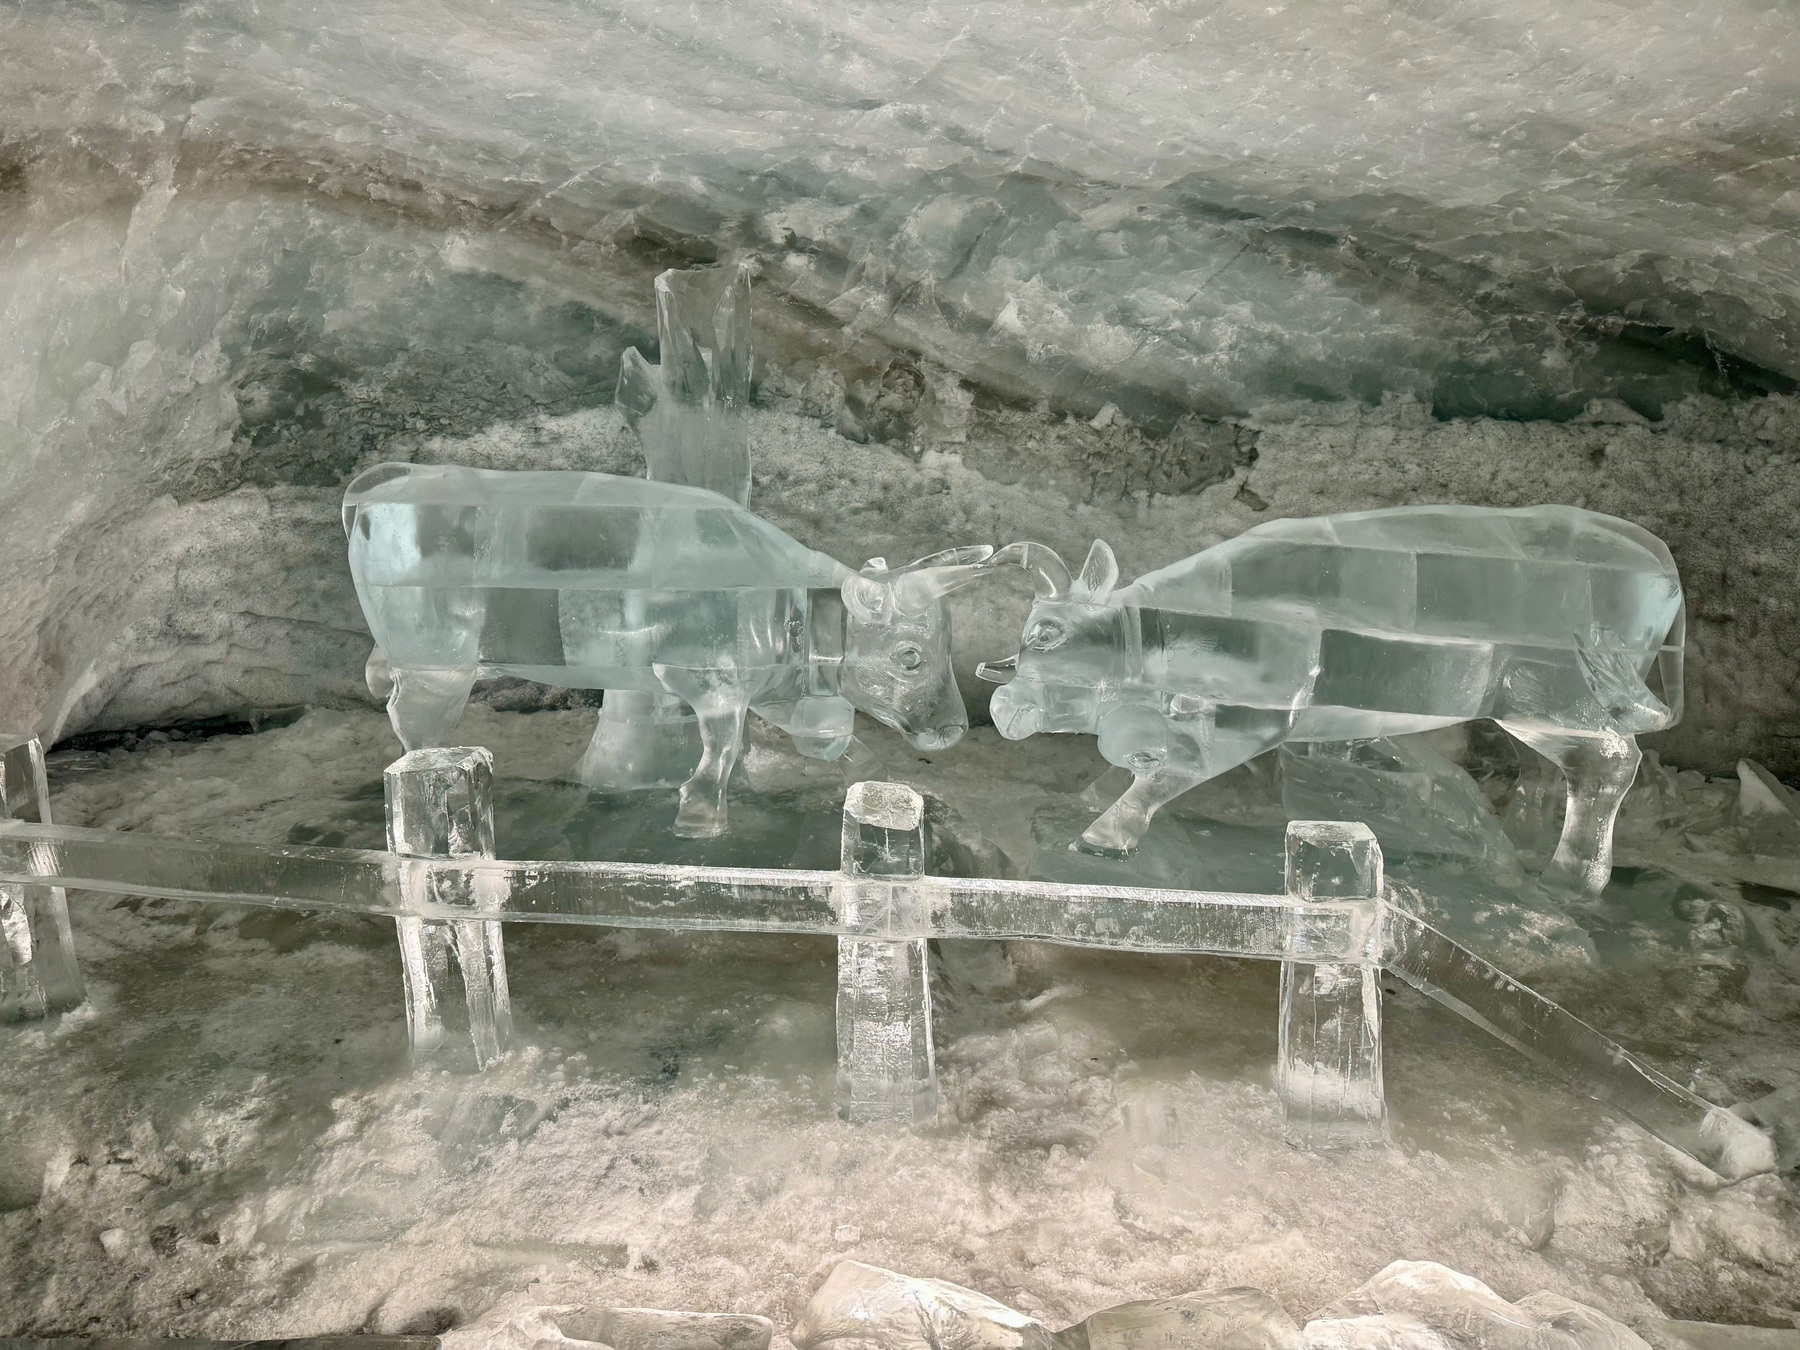 Ice sculptures of two bison inside a frosty cave, enclosed by a small ice barrier.